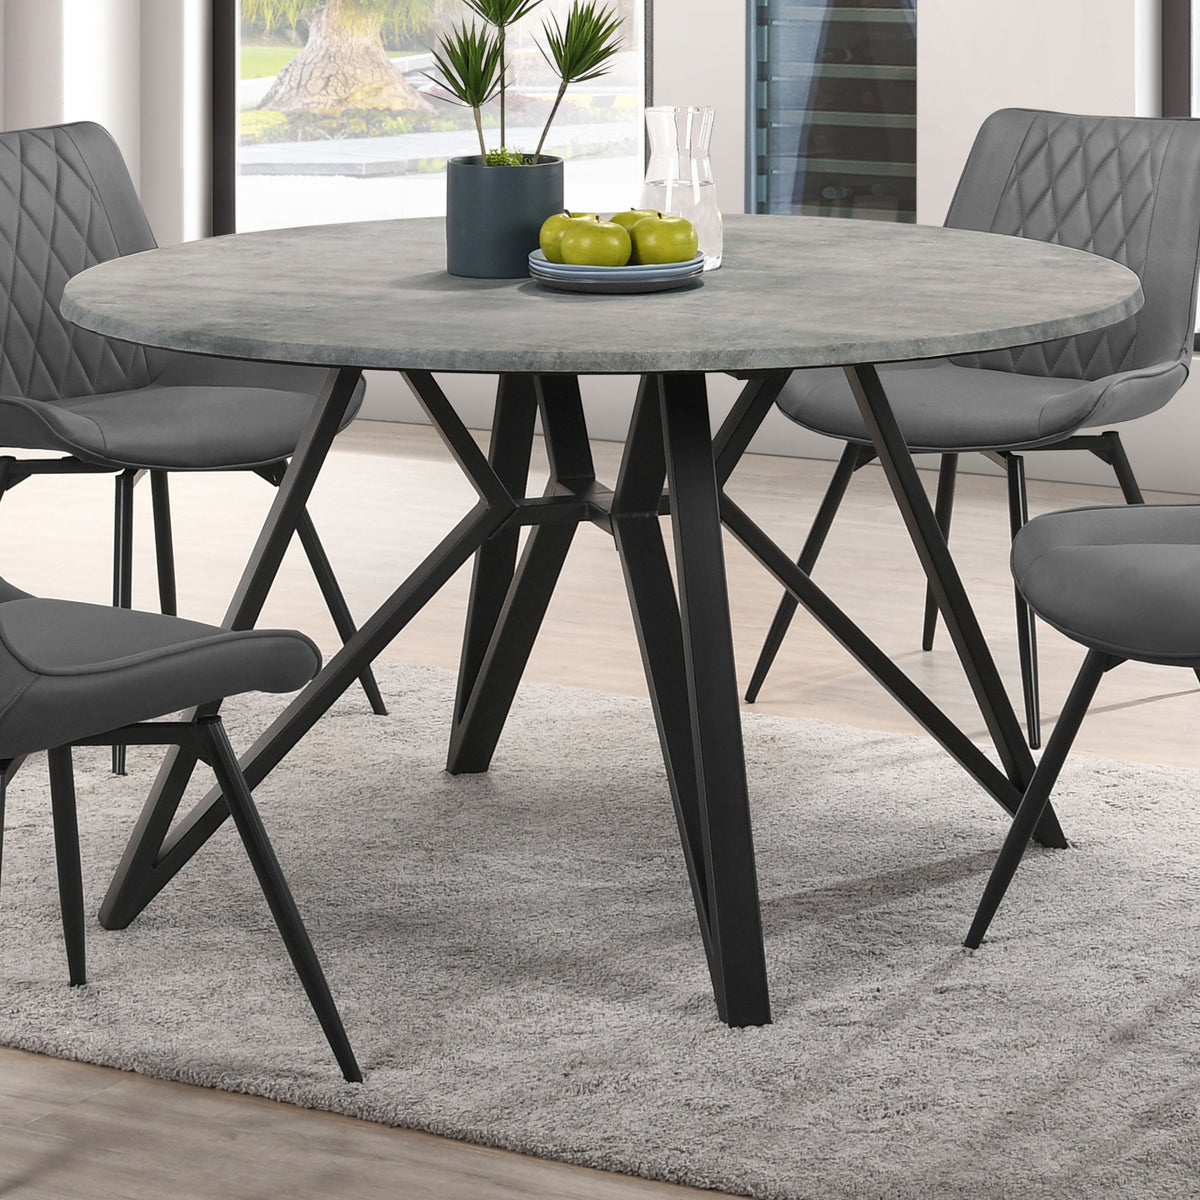 Neil Round Wood Top Dining Table Concrete and Black Neil Round Wood Top Dining Table Concrete and Black Half Price Furniture